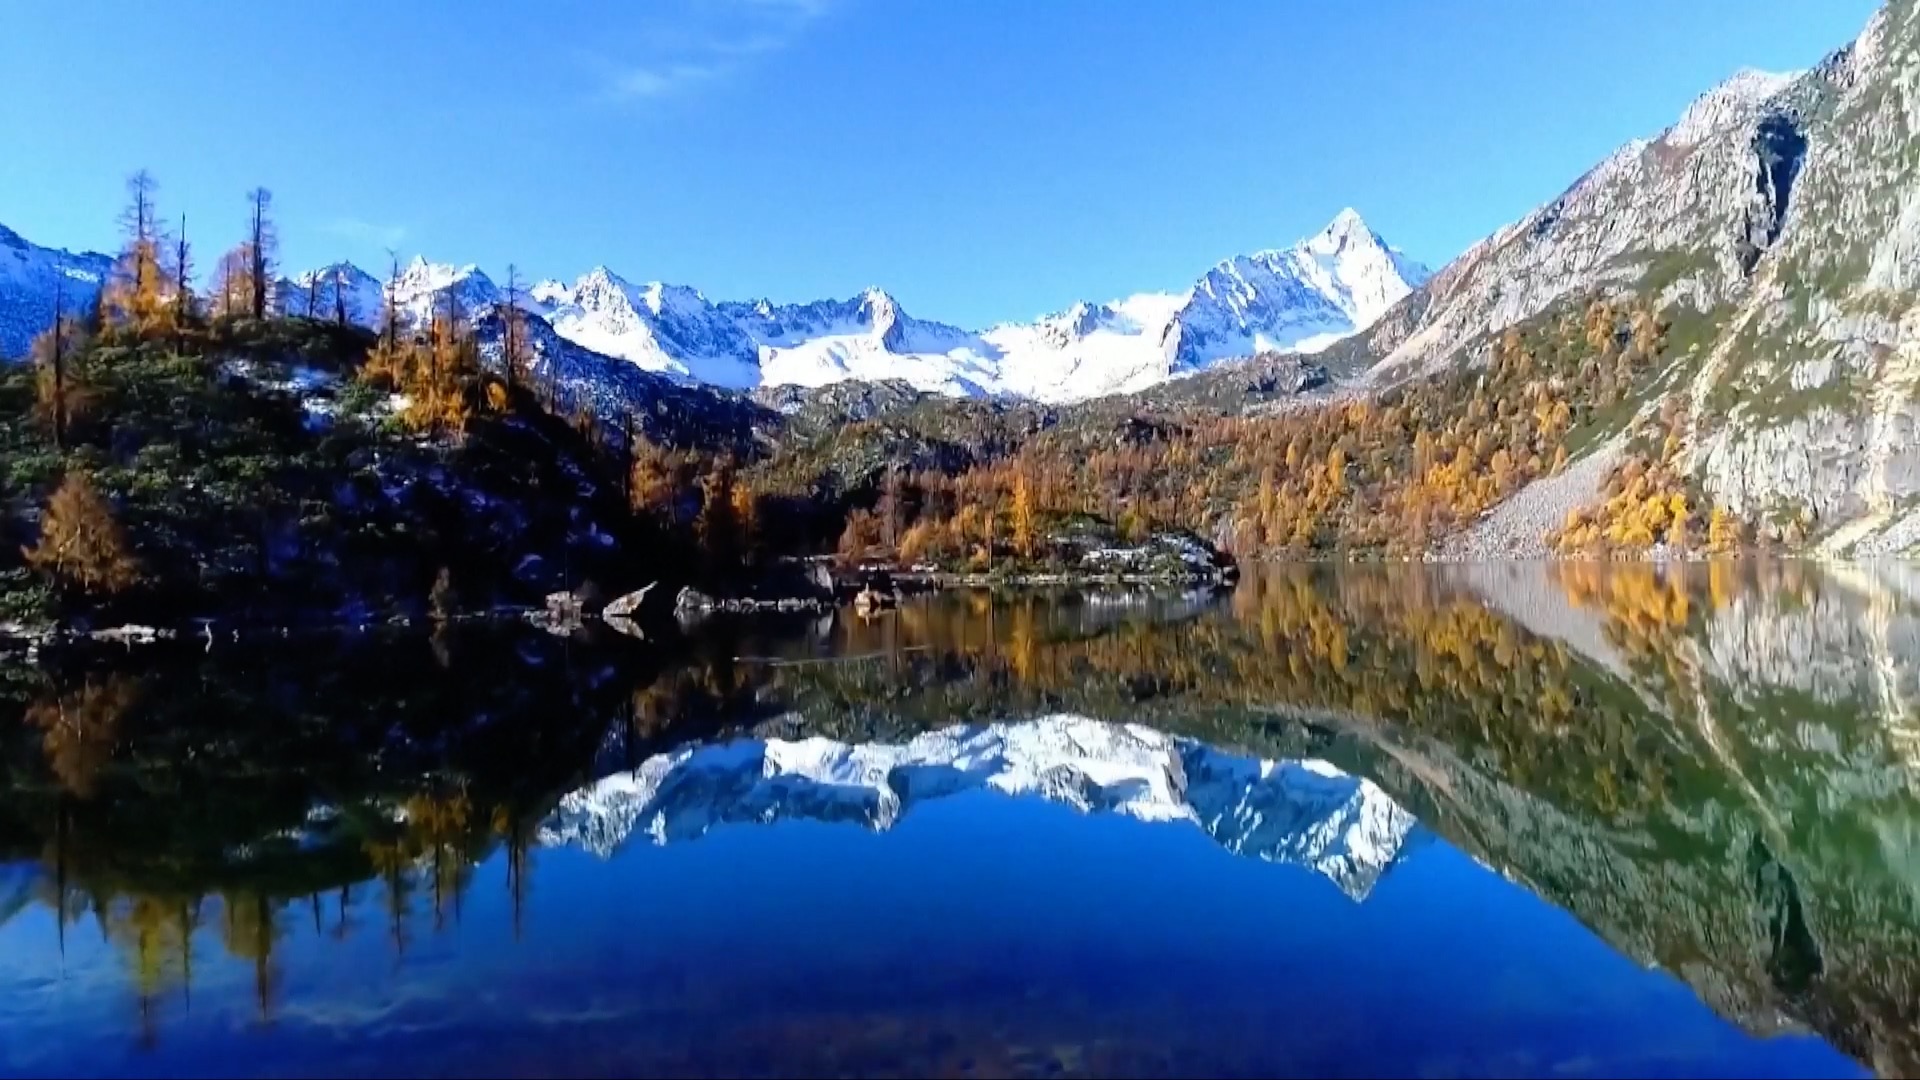 Hailuogou, a glacier and a forest nature reserve in southwest China's Sichuan Province. /Screenshot 